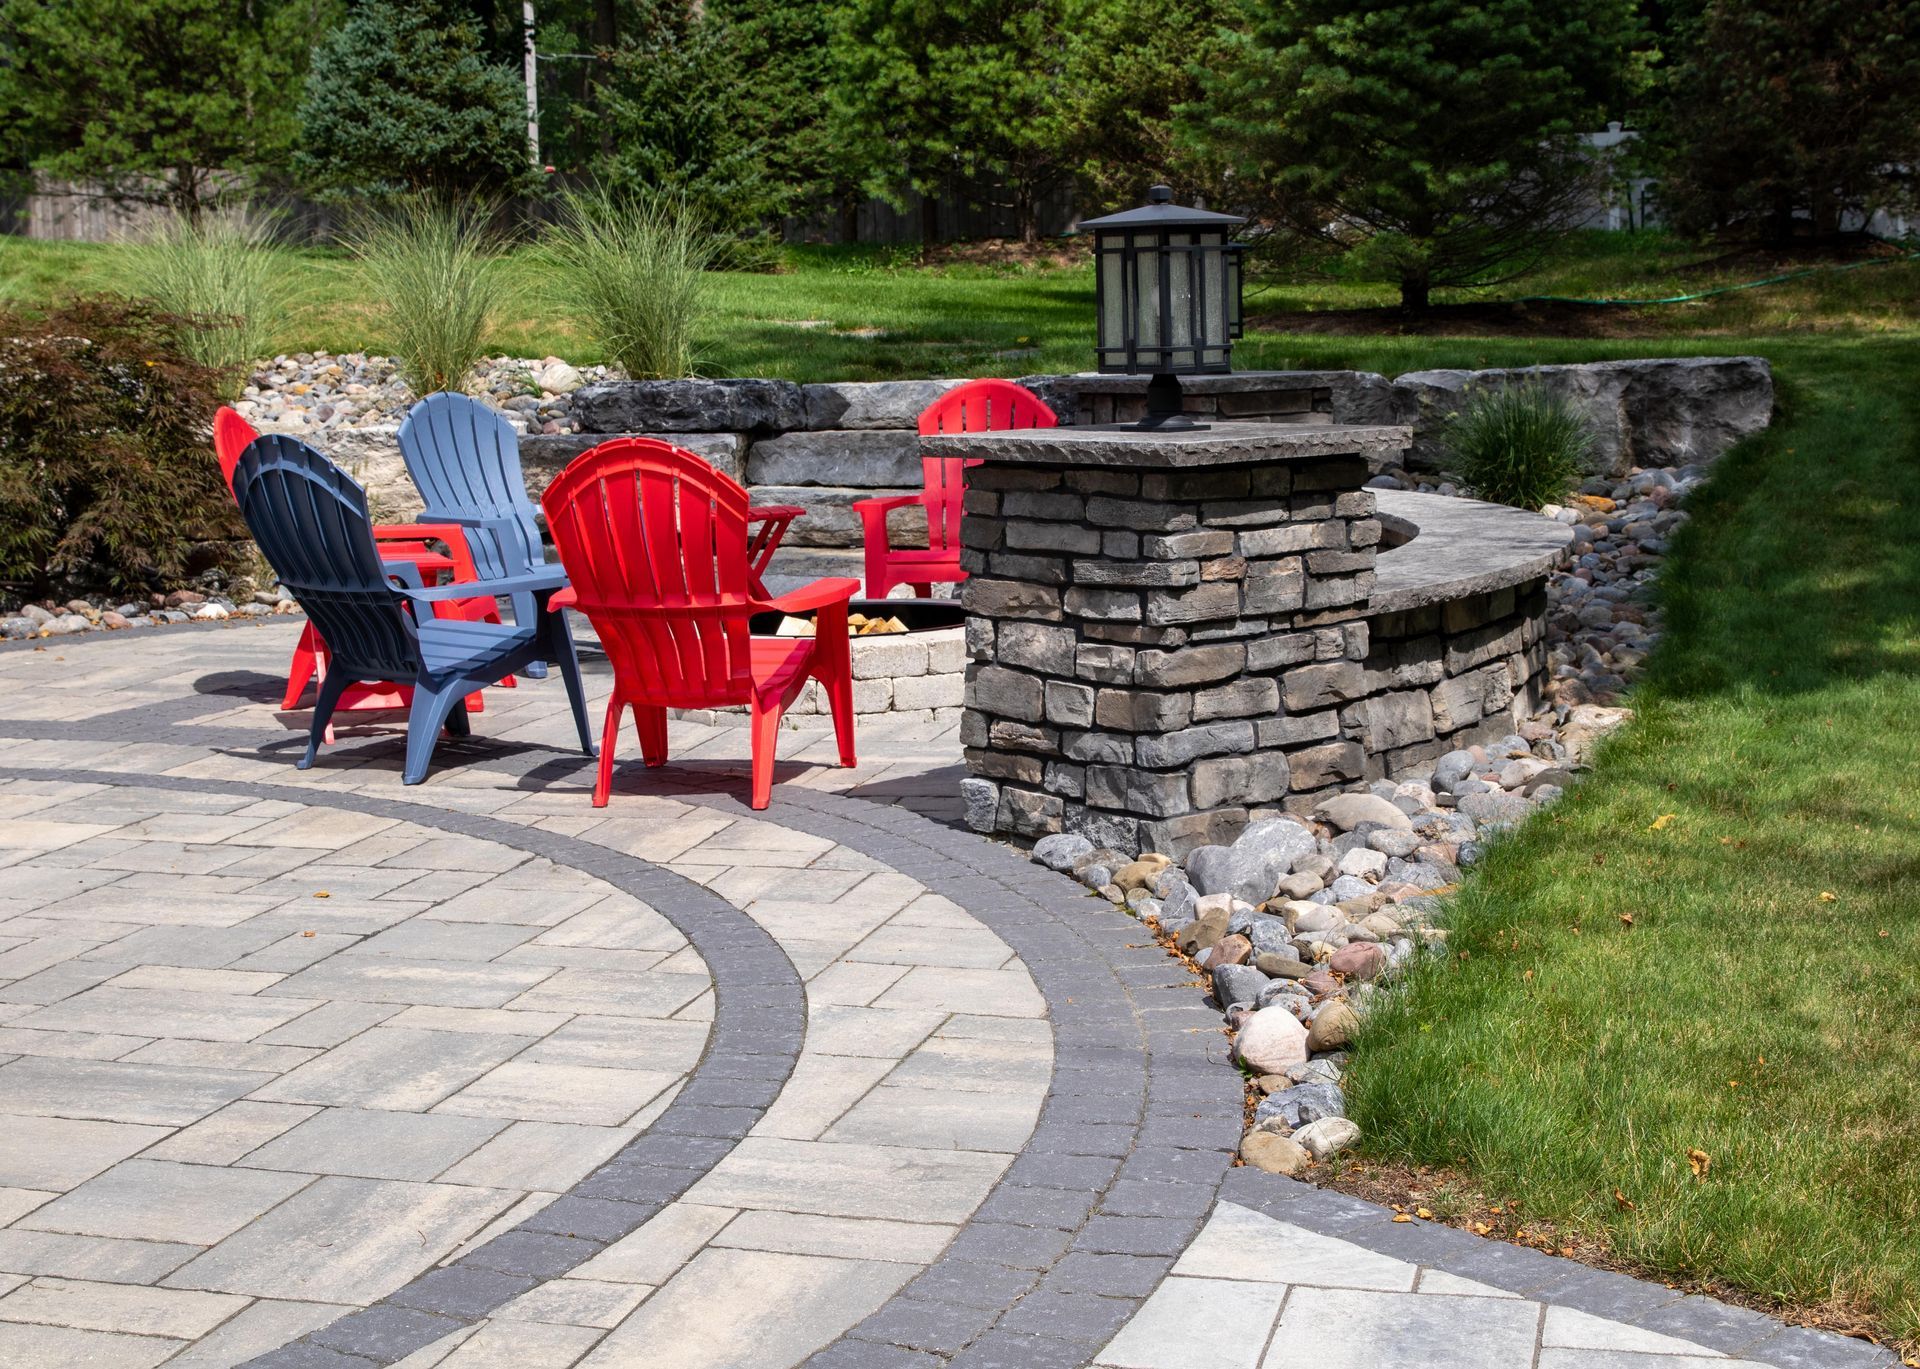 Retaining Wall Design by Hunter Springs Landscape Artisans featuring curved natural stone retaining wall and colorful seating.